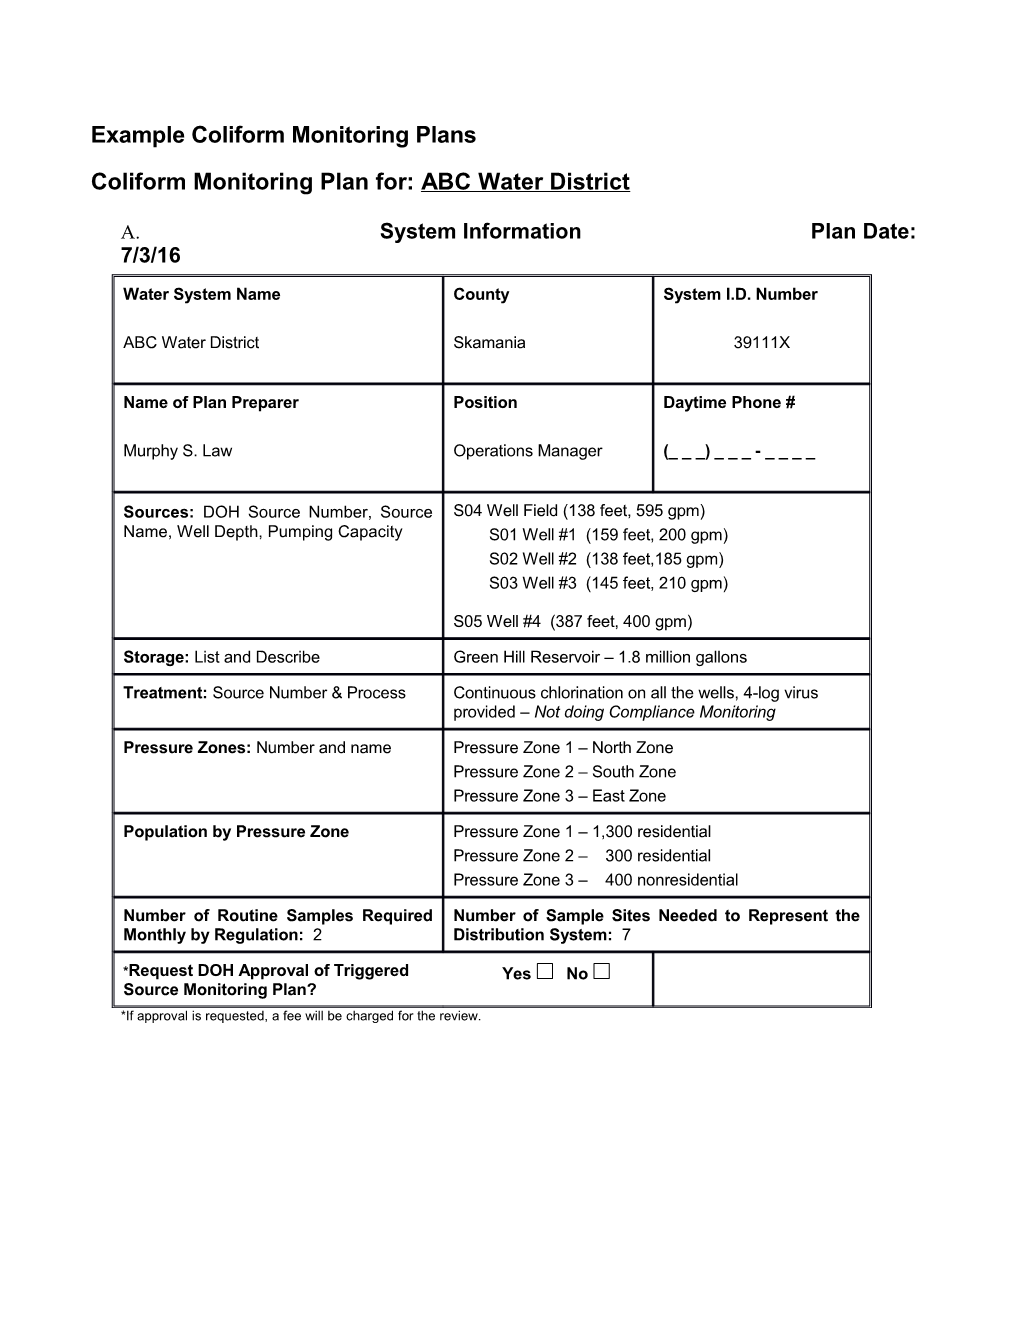 Coliform Monitoring Plan For: ABC Water District